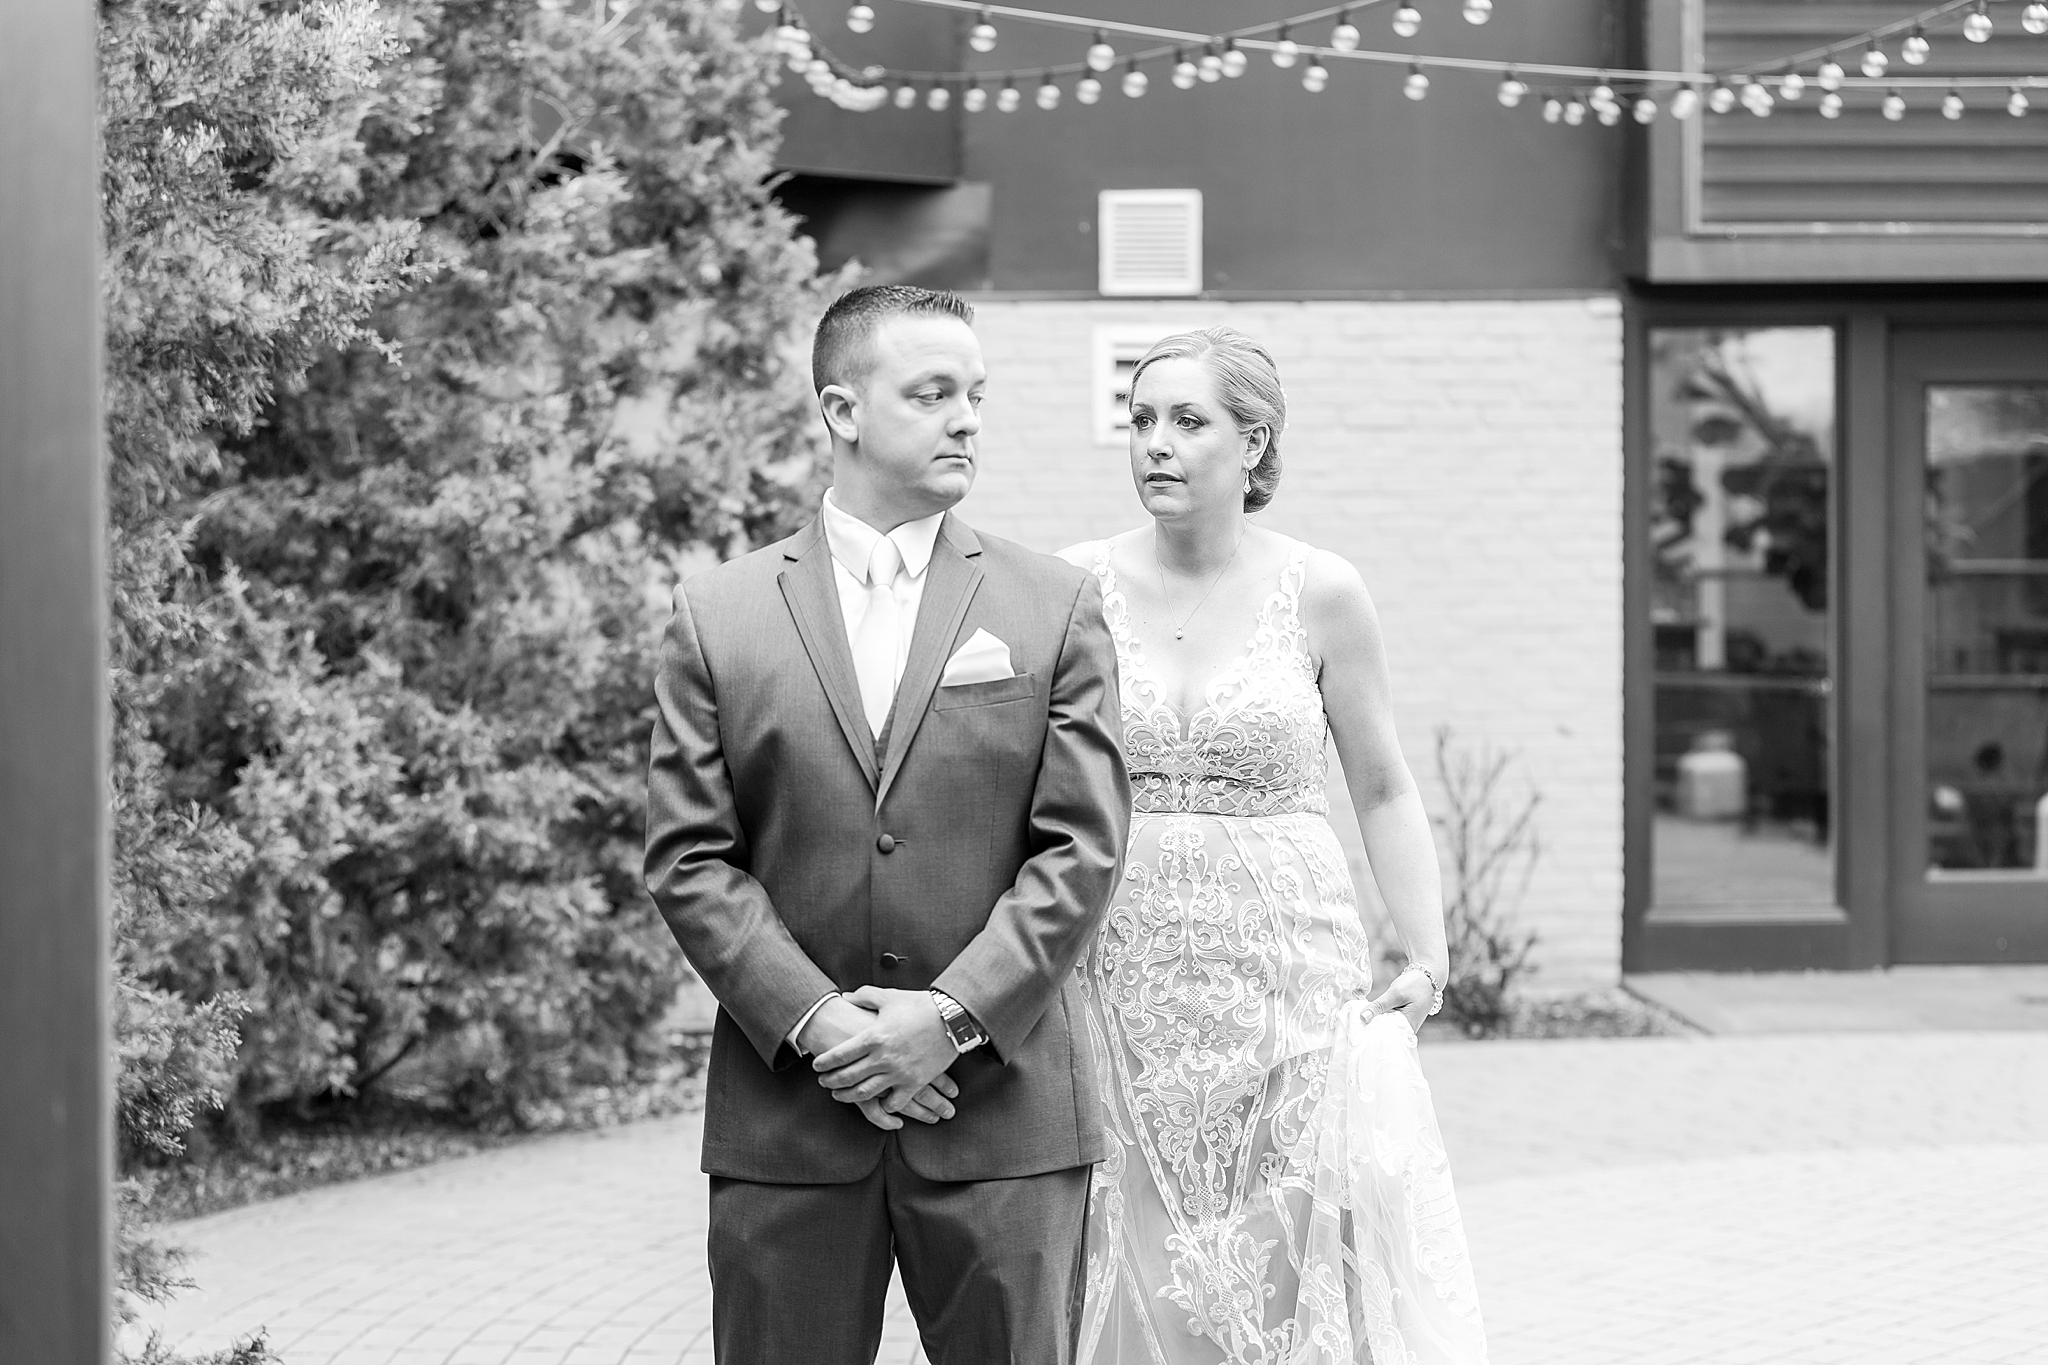 modern-romantic-wedding-photography-at-webers-in-ann-arbor-michigan-by-courtney-carolyn-photography_0019.jpg